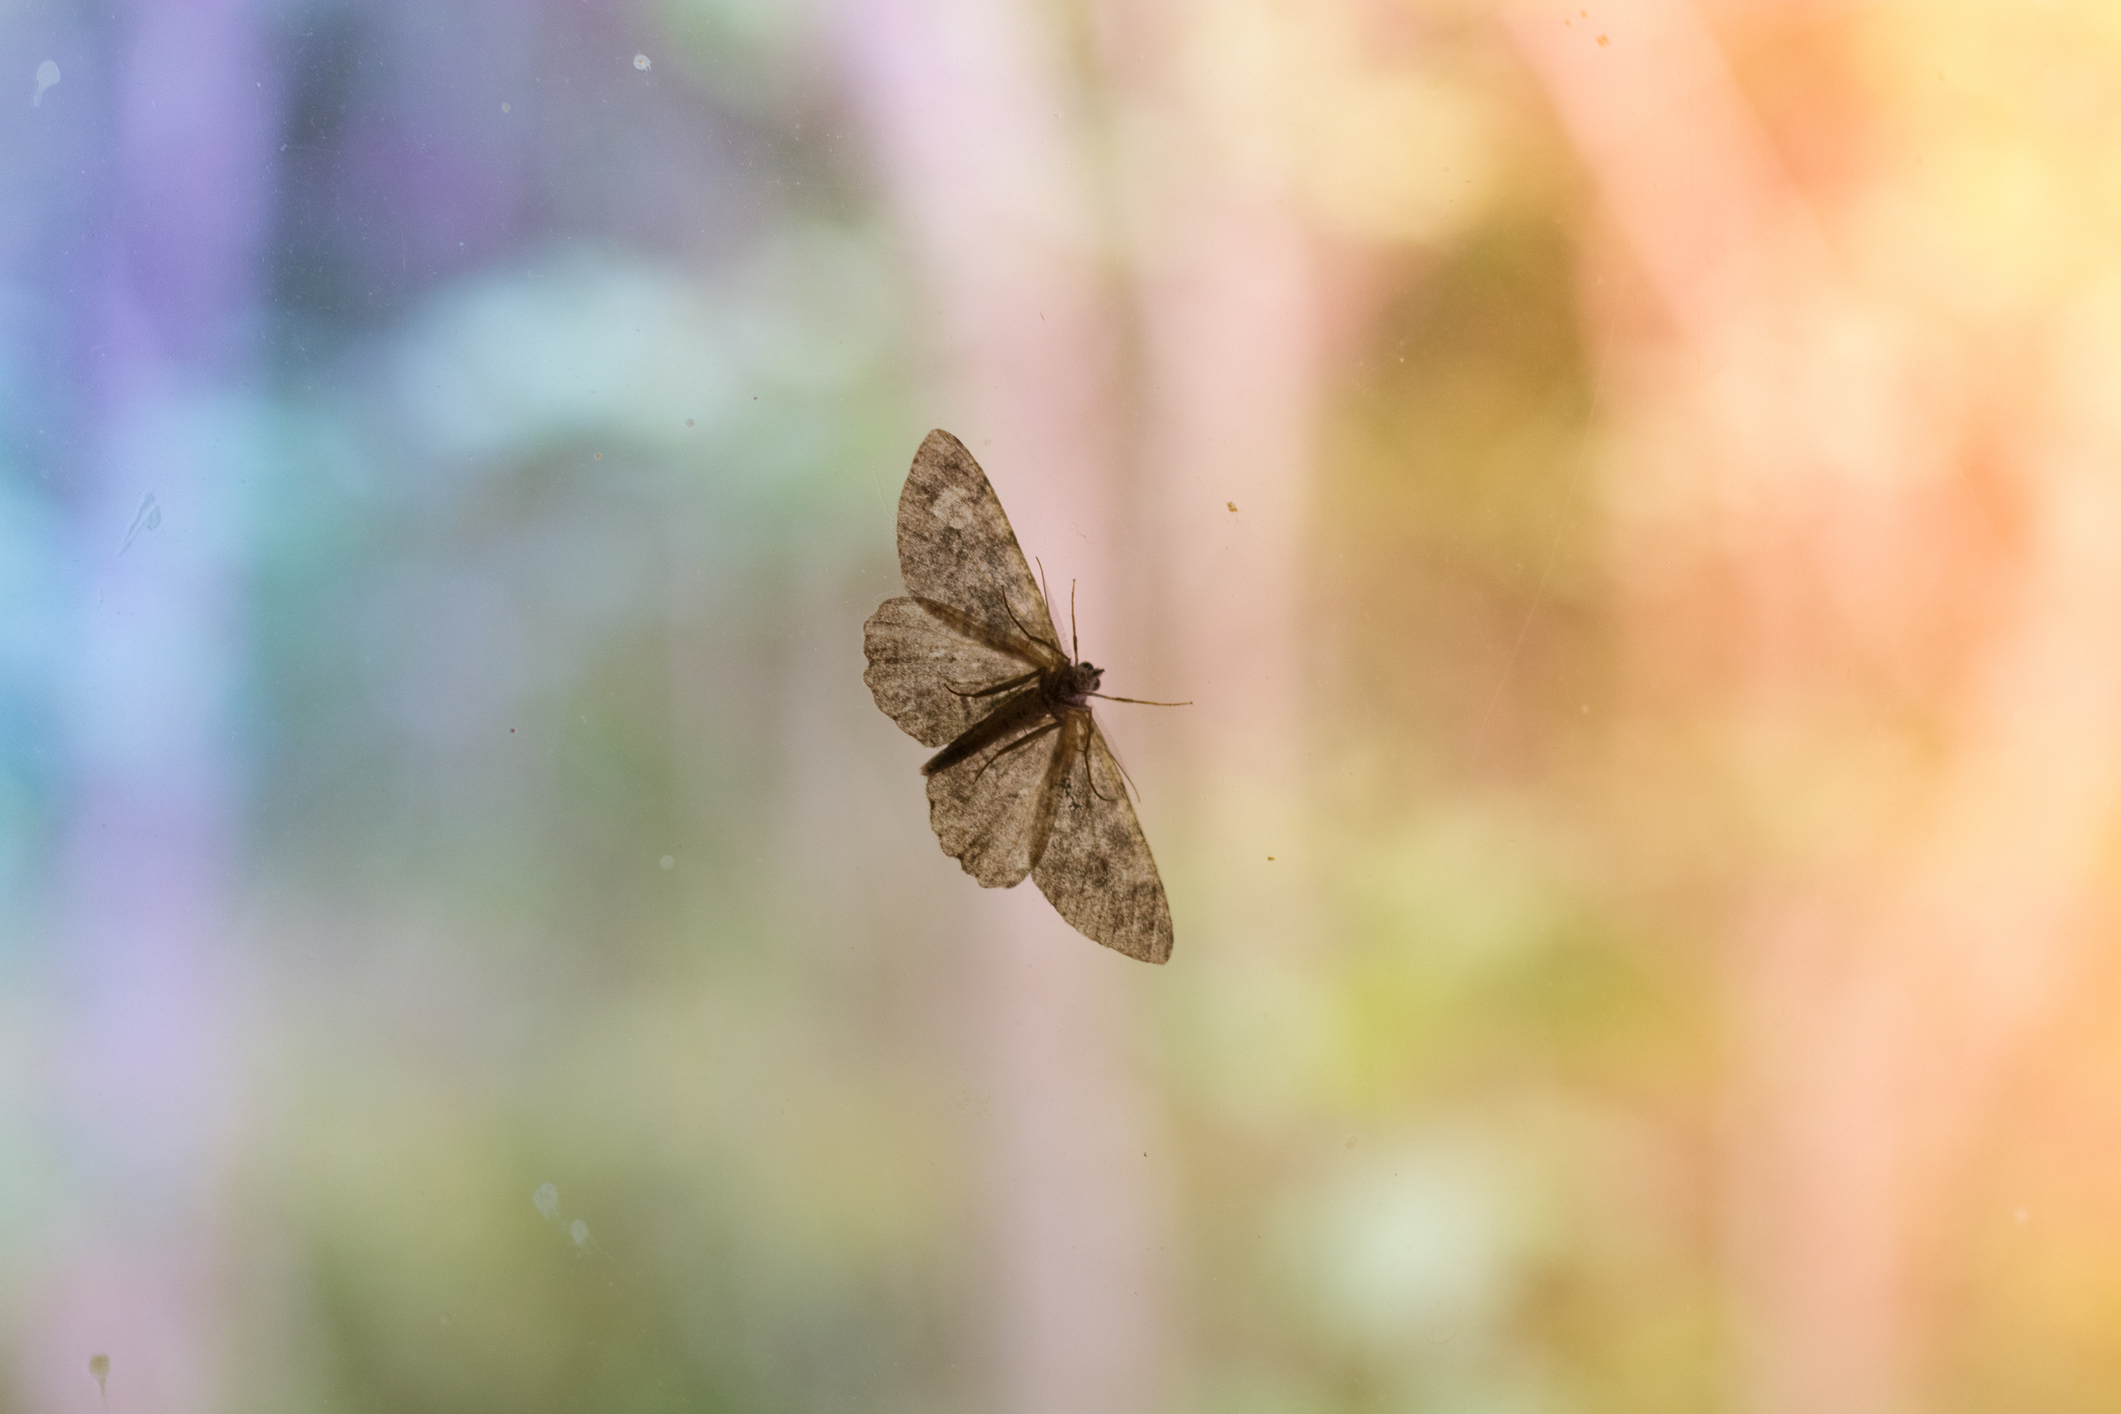 A moth resting on a glass window with a blurred background